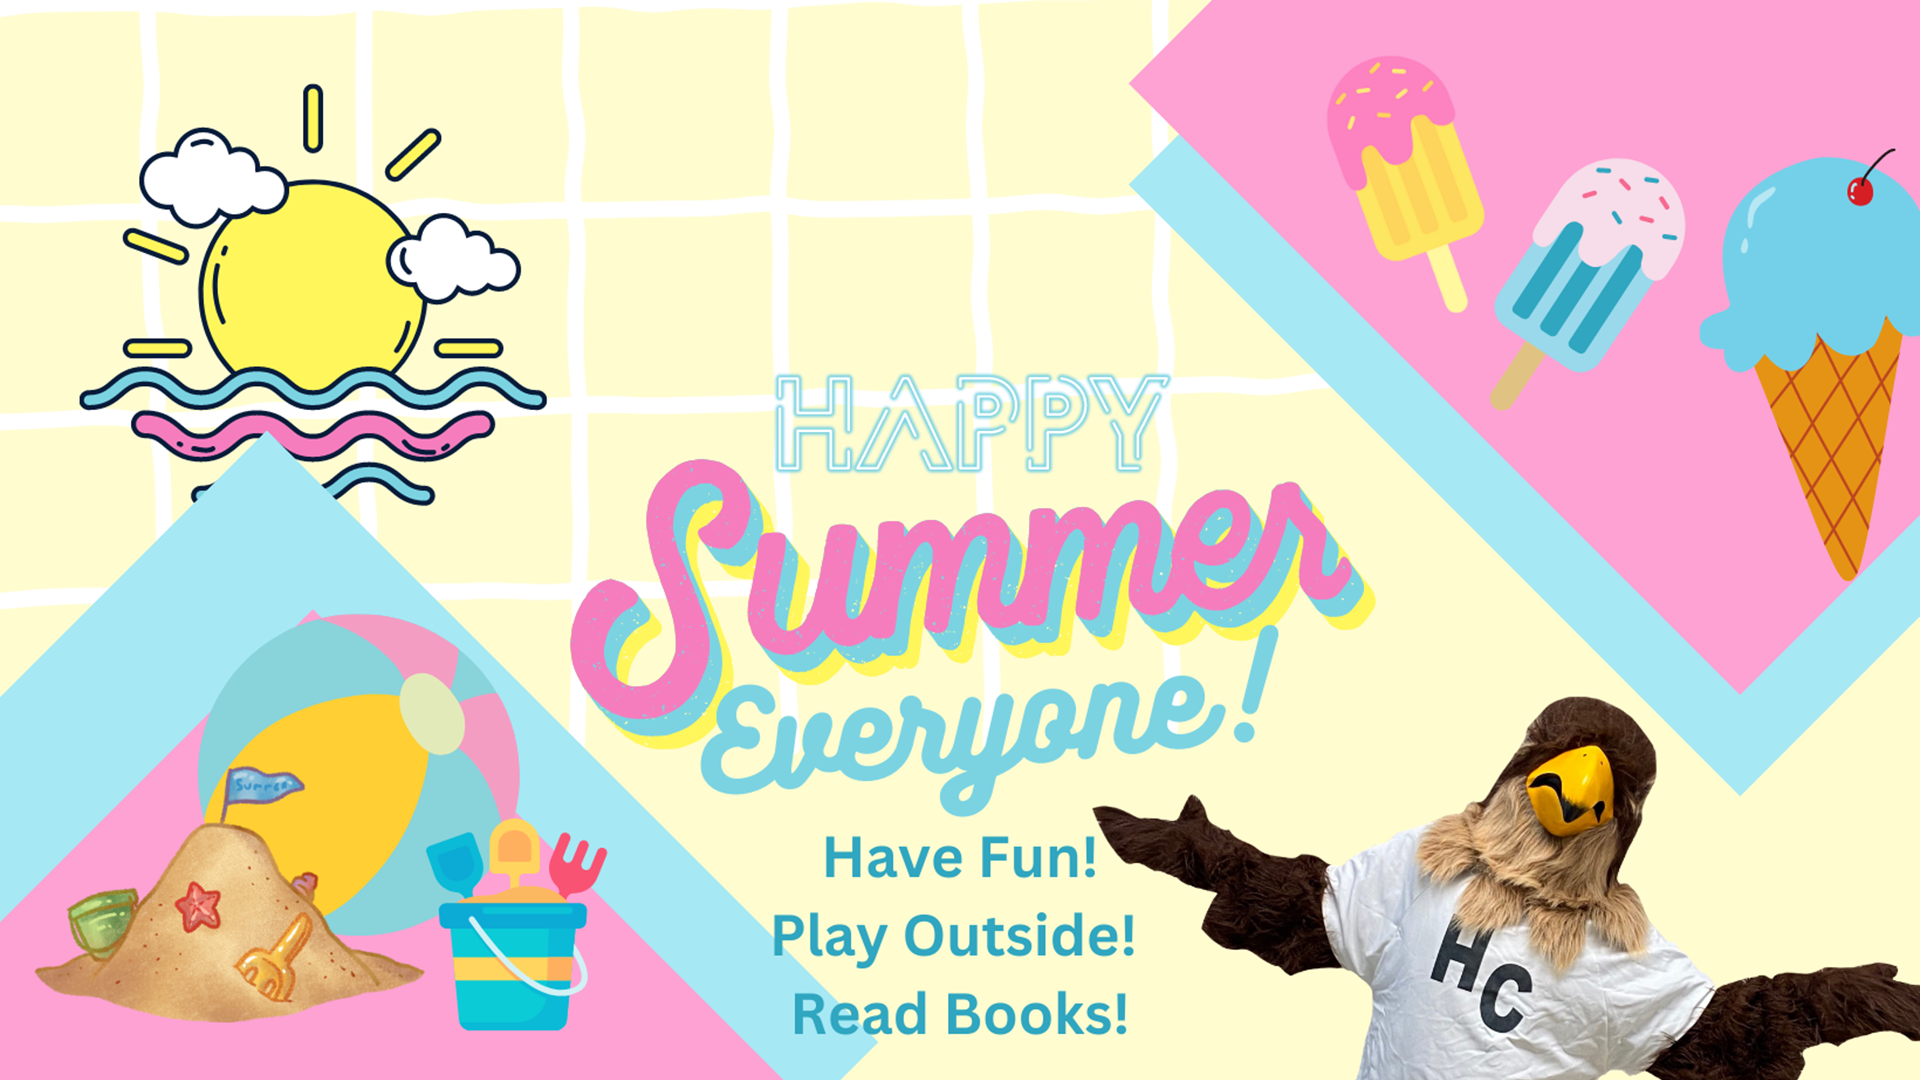 Have A Great Summer Break!